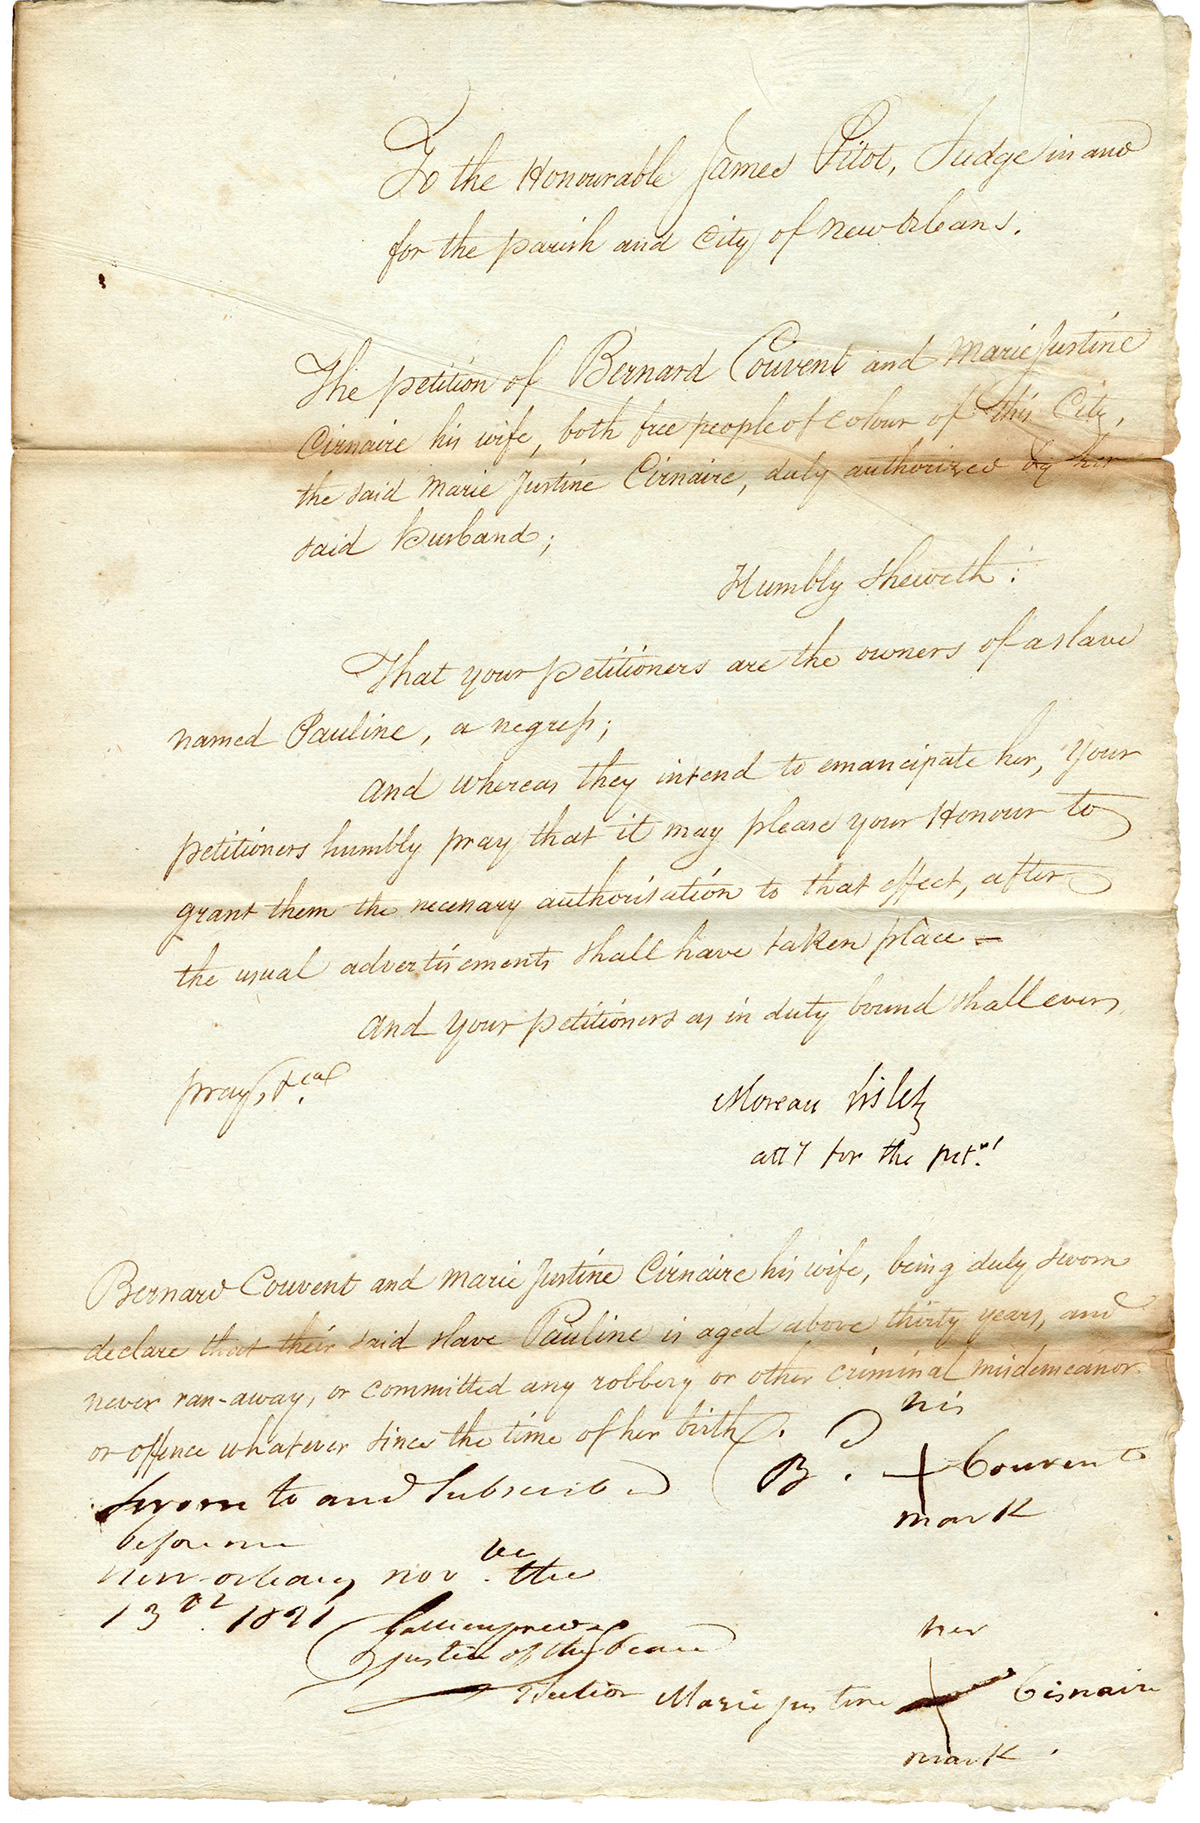 Emancipation petition of Bernard Couvent and Marie Justine Cirnaire, 1821